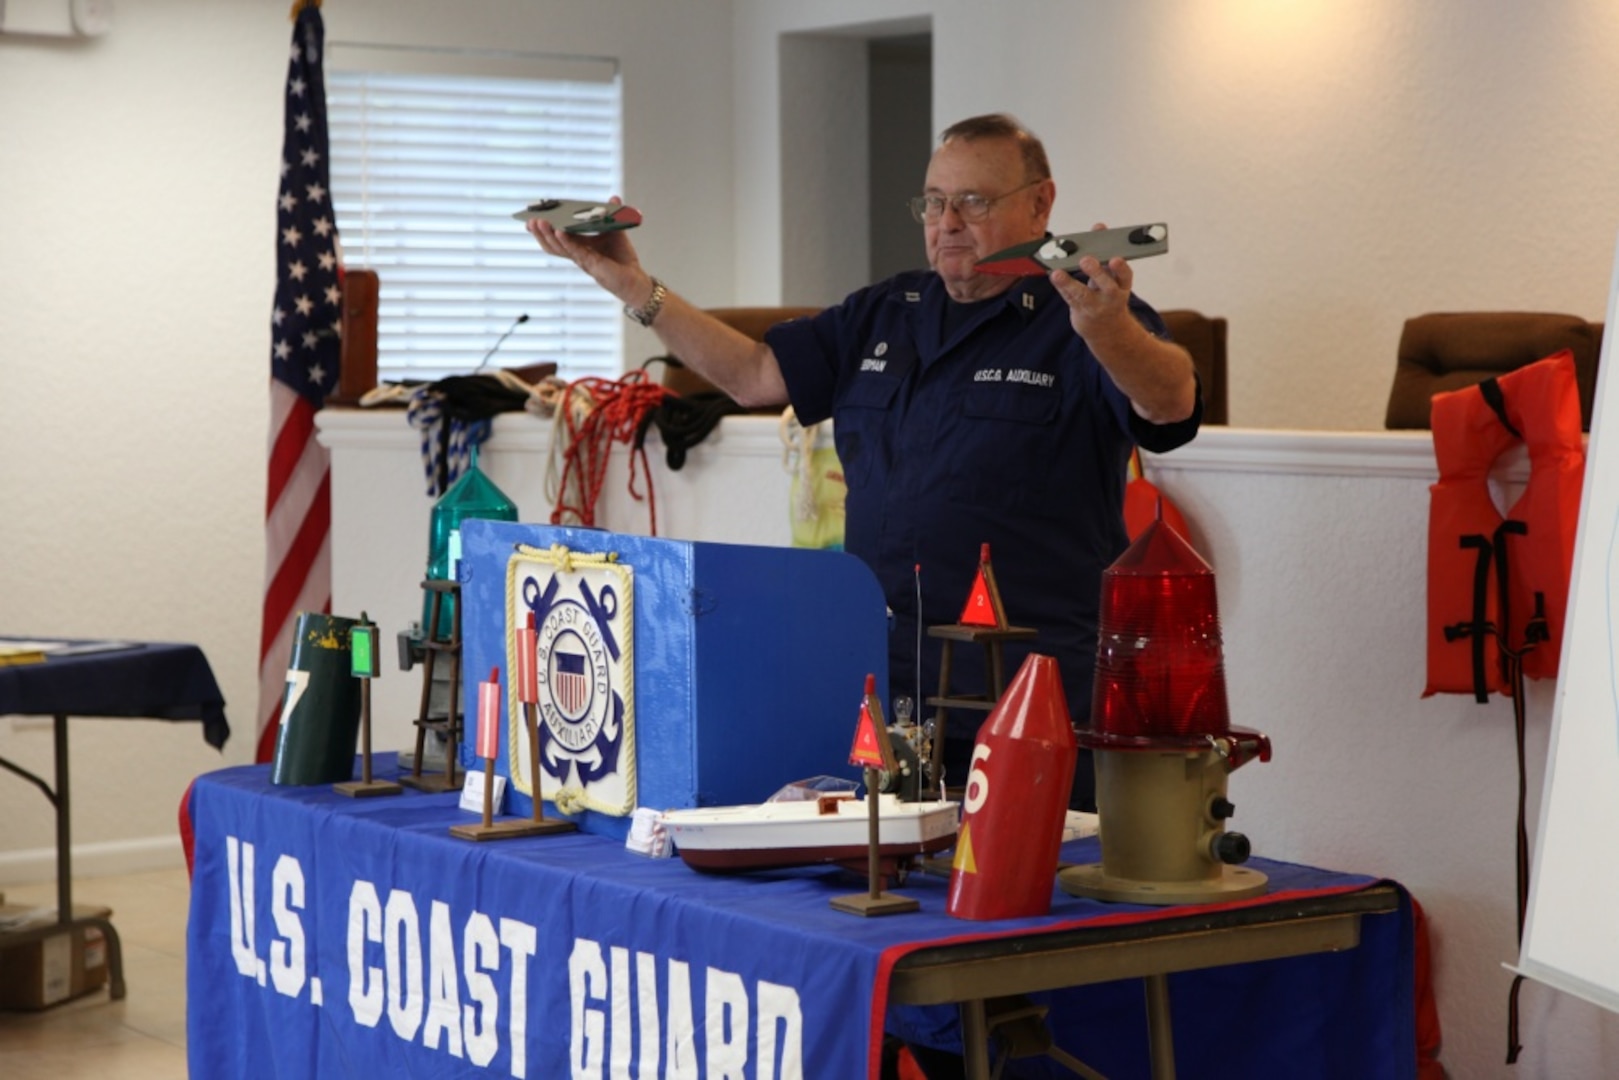 RIVIERA BEACH, Fla. - Coast Guard Auxiliary member Steve Seidman, a Coast Guard certified instructor, uses visual aids to teach recreational mariners the basics about nautical navigation during a boating safety course in Palm Beach Shores, Fla., Sep. 16, 2012. The course is designed to teach boaters the basics about boat handling and safety. Coast Guard Photo by Petty Officer 1st Class Krystyna A. Hannum